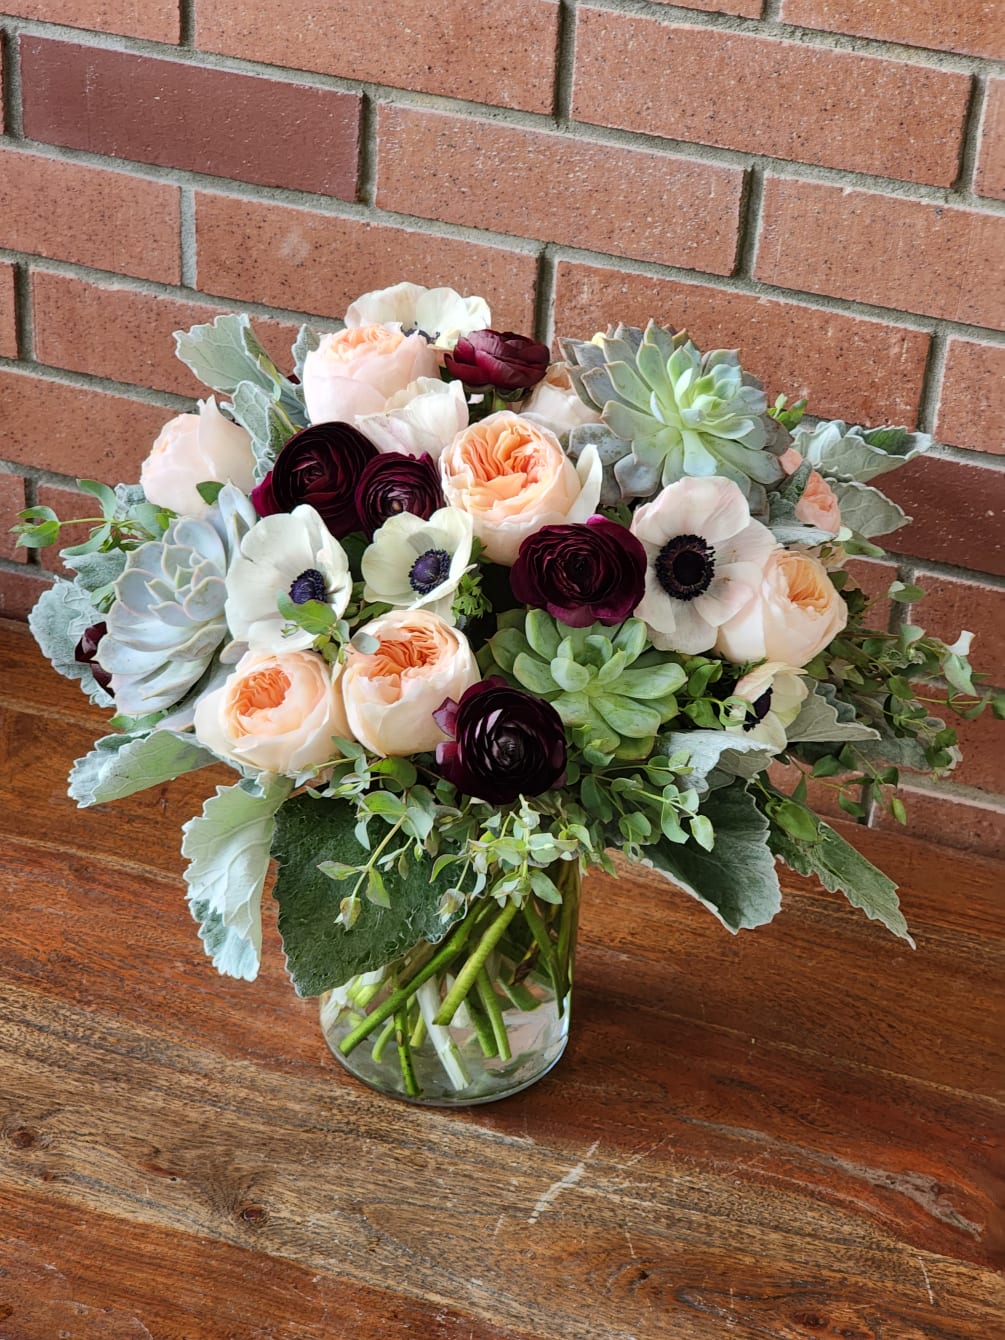 Send these lovely high end blooms to the person you love so